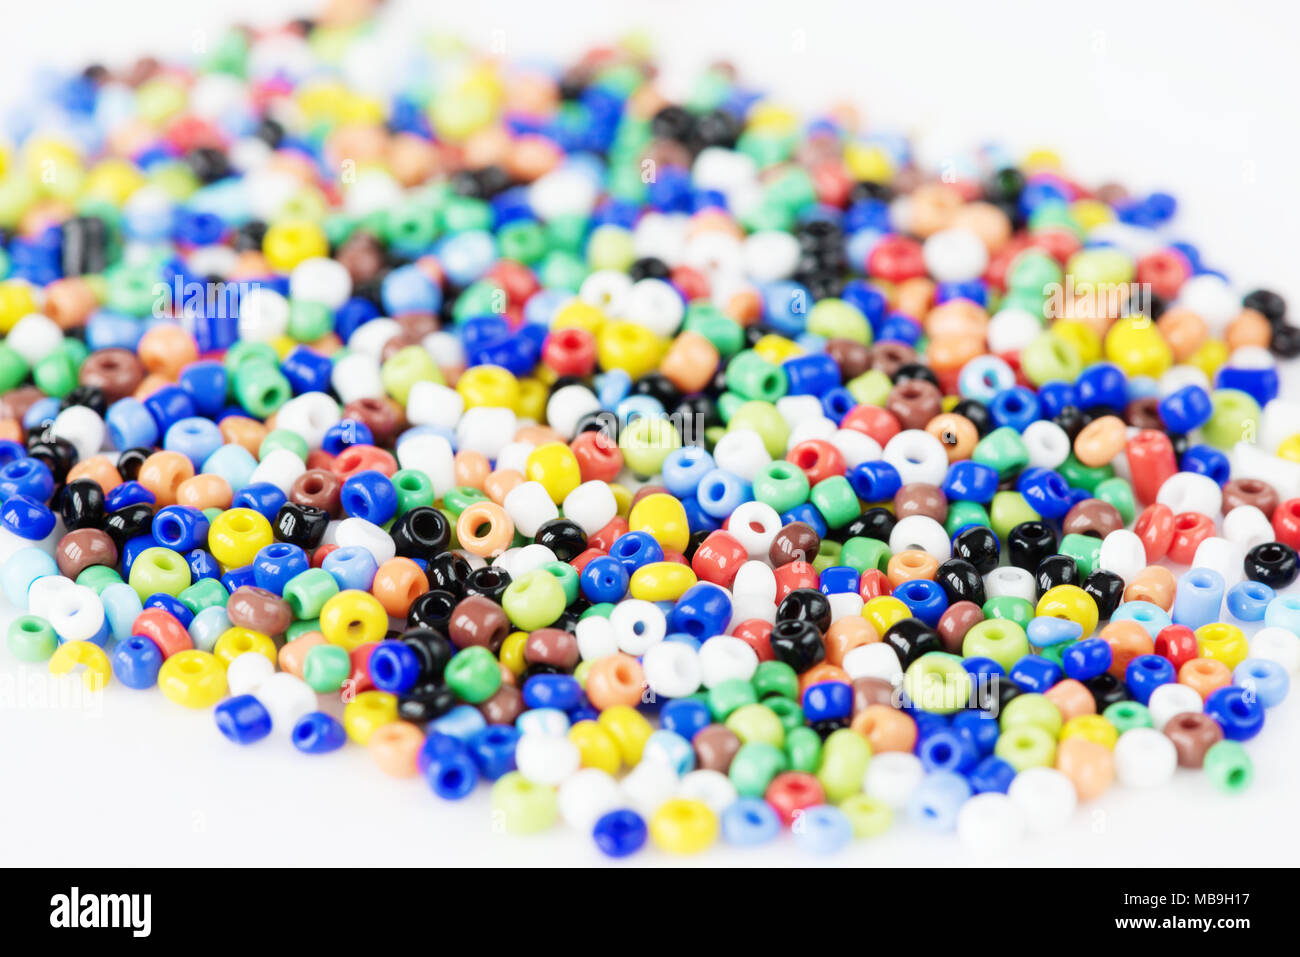 Heap of multi-colored beads for needlework are scattered on a white background Stock Photo